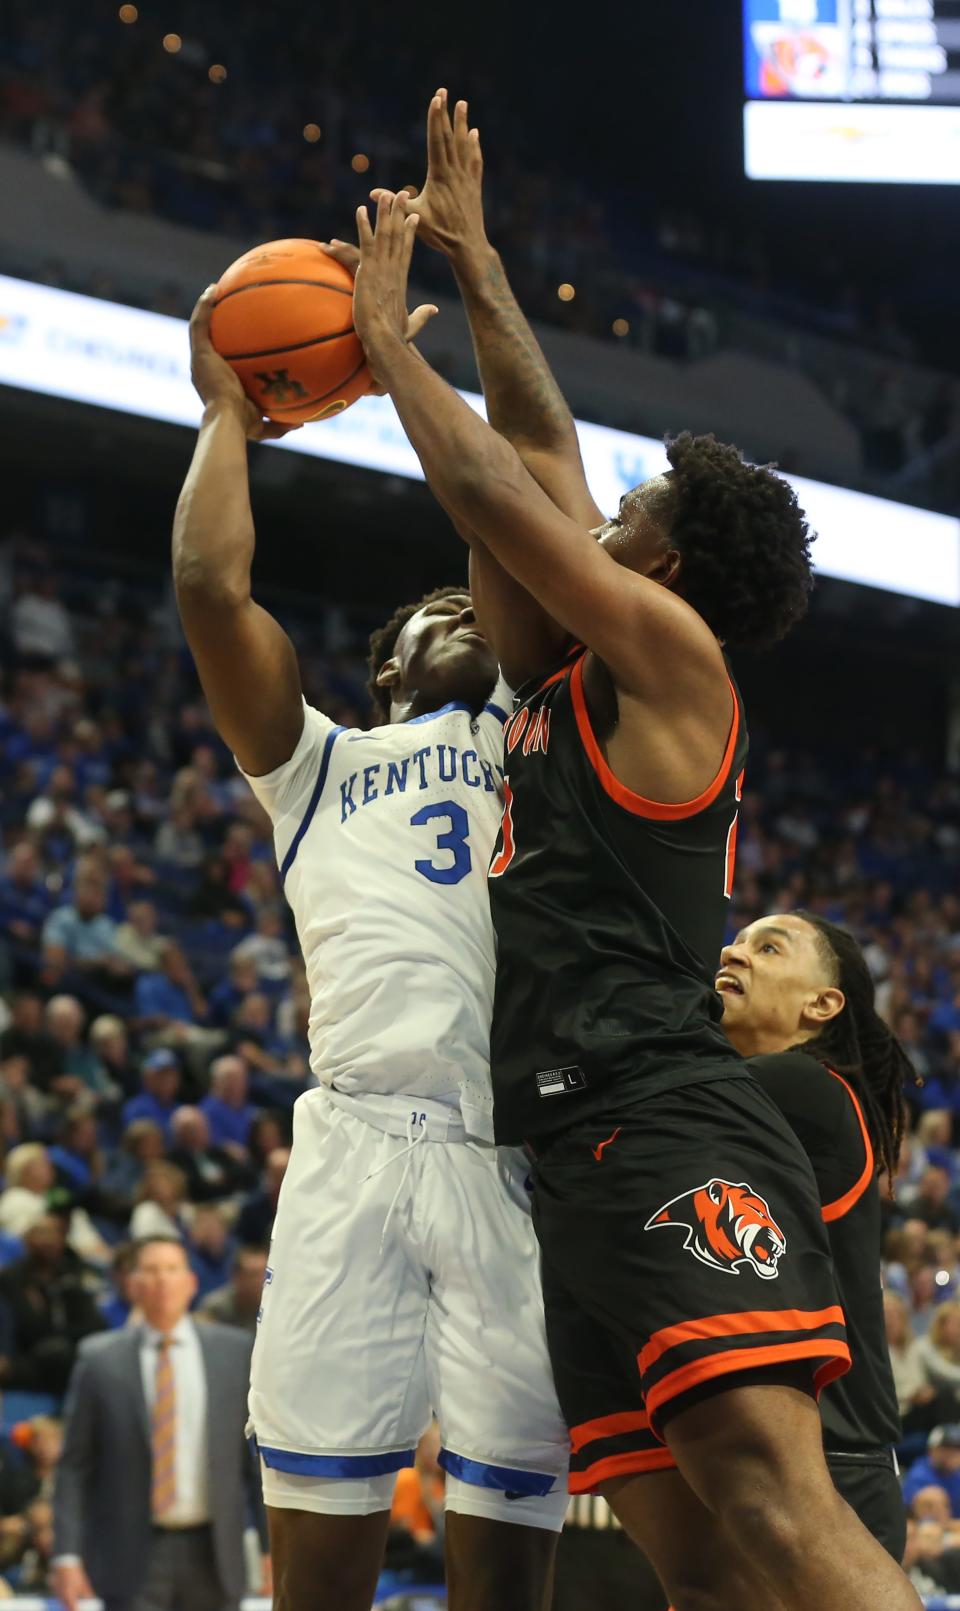 Kentucky’s Adou Thiero tries to make a shot against Georgetown College’s Kyran Jones on Friday night.